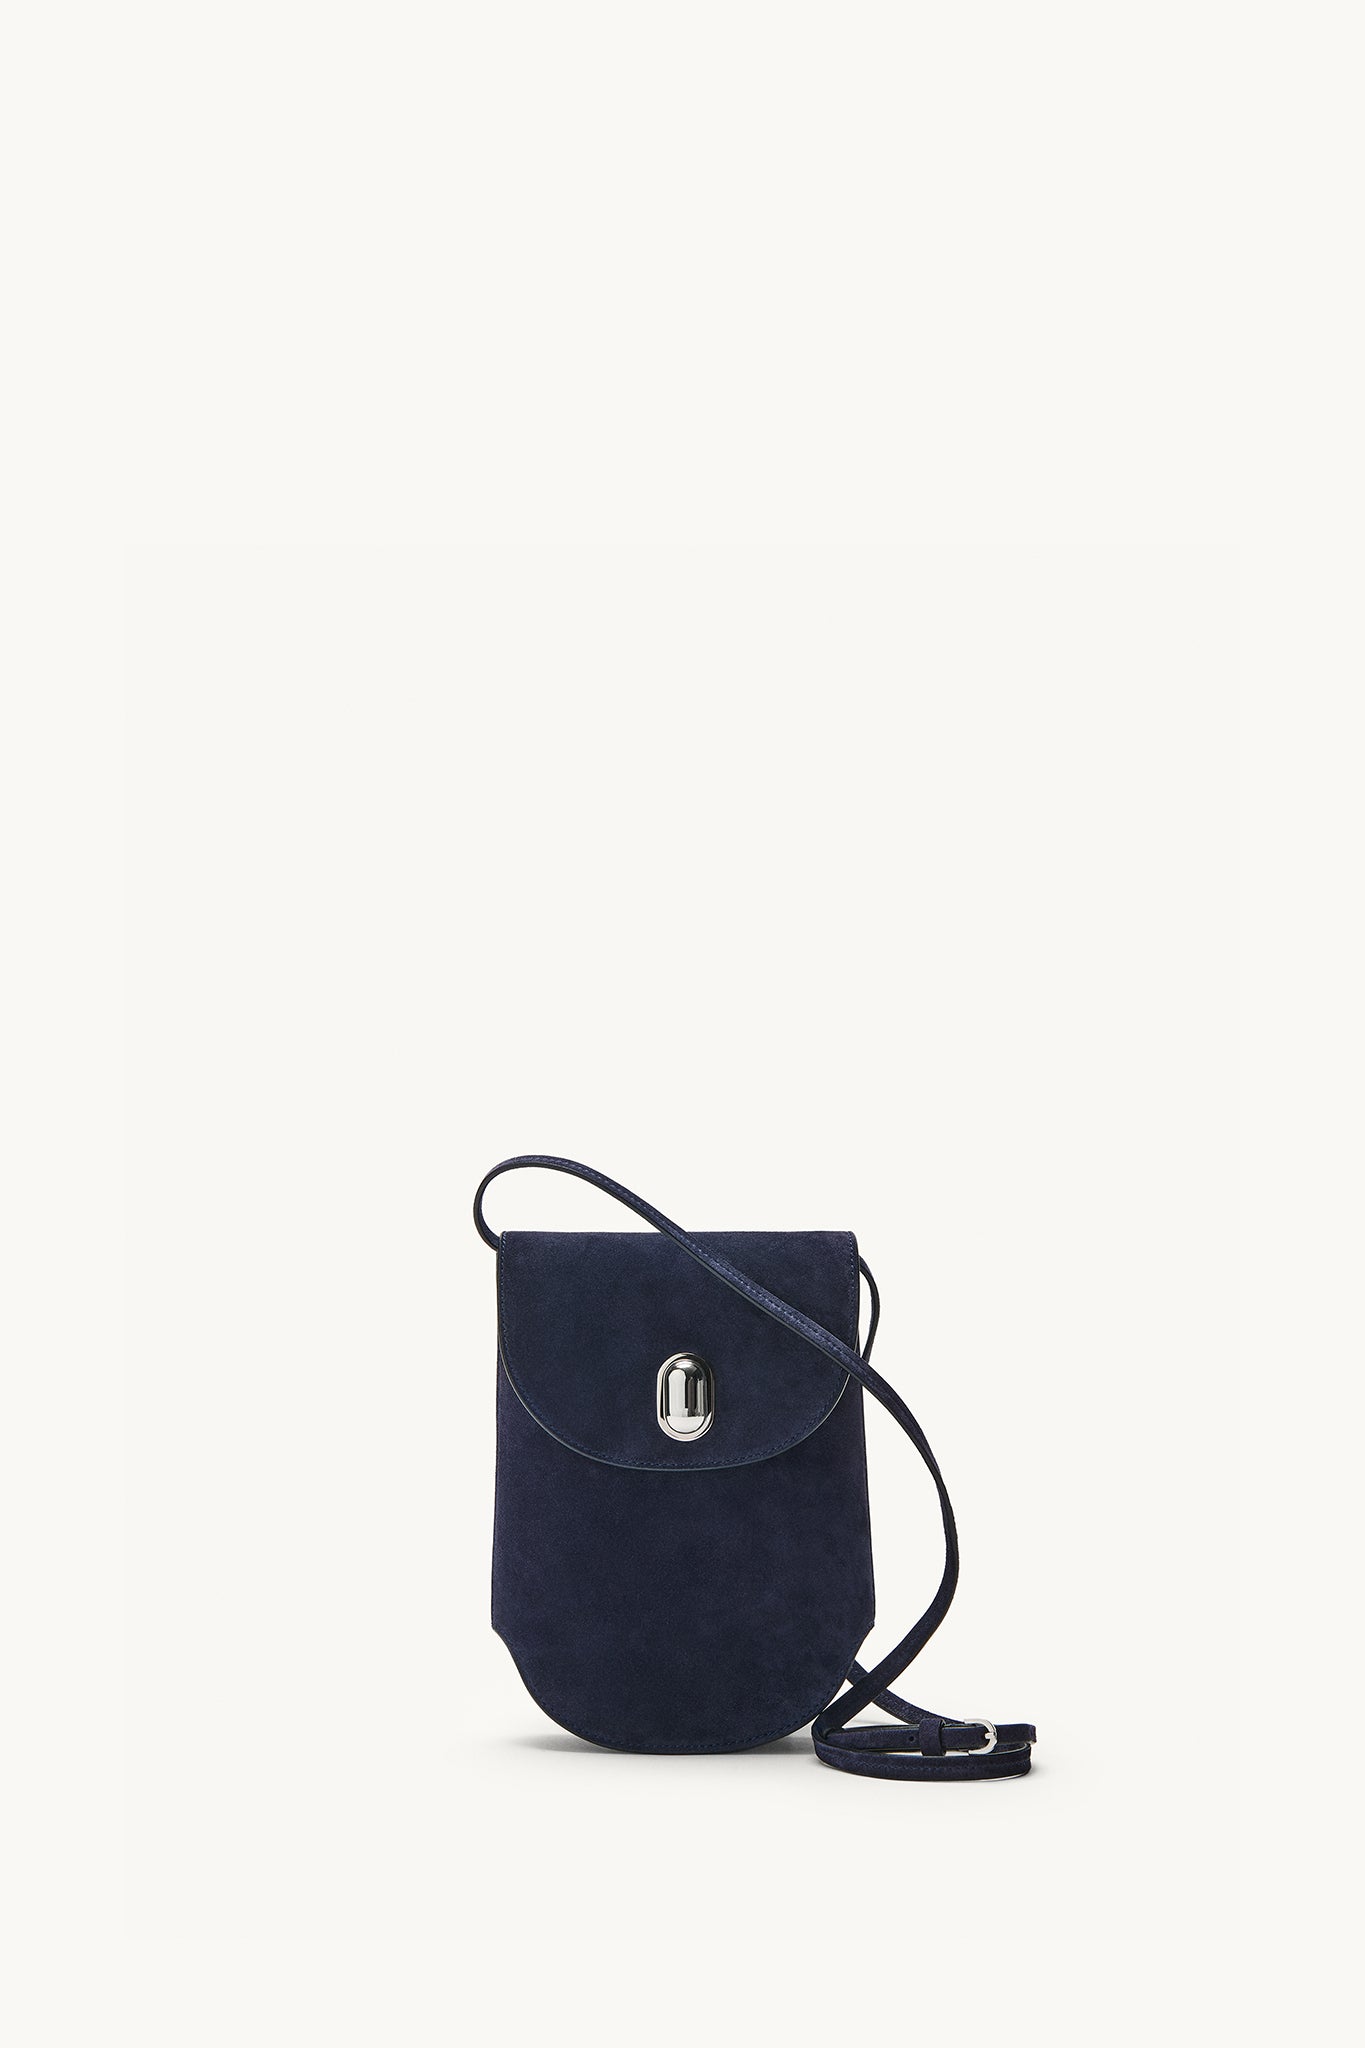 Tondo Pouch in Navy Suede